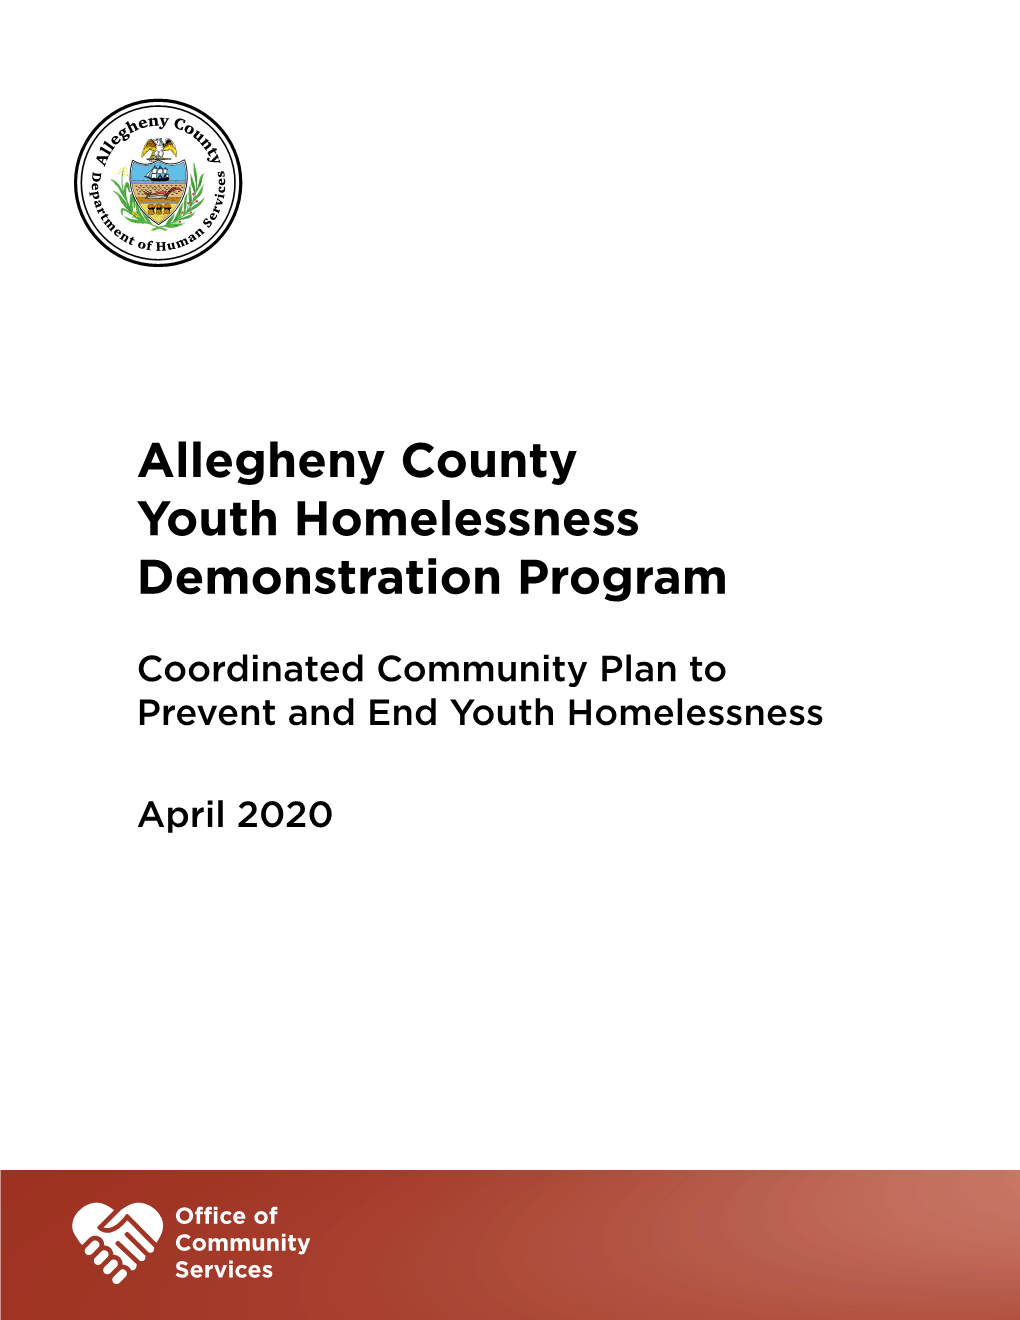 Scope of Youth Homelessness in Allegheny County